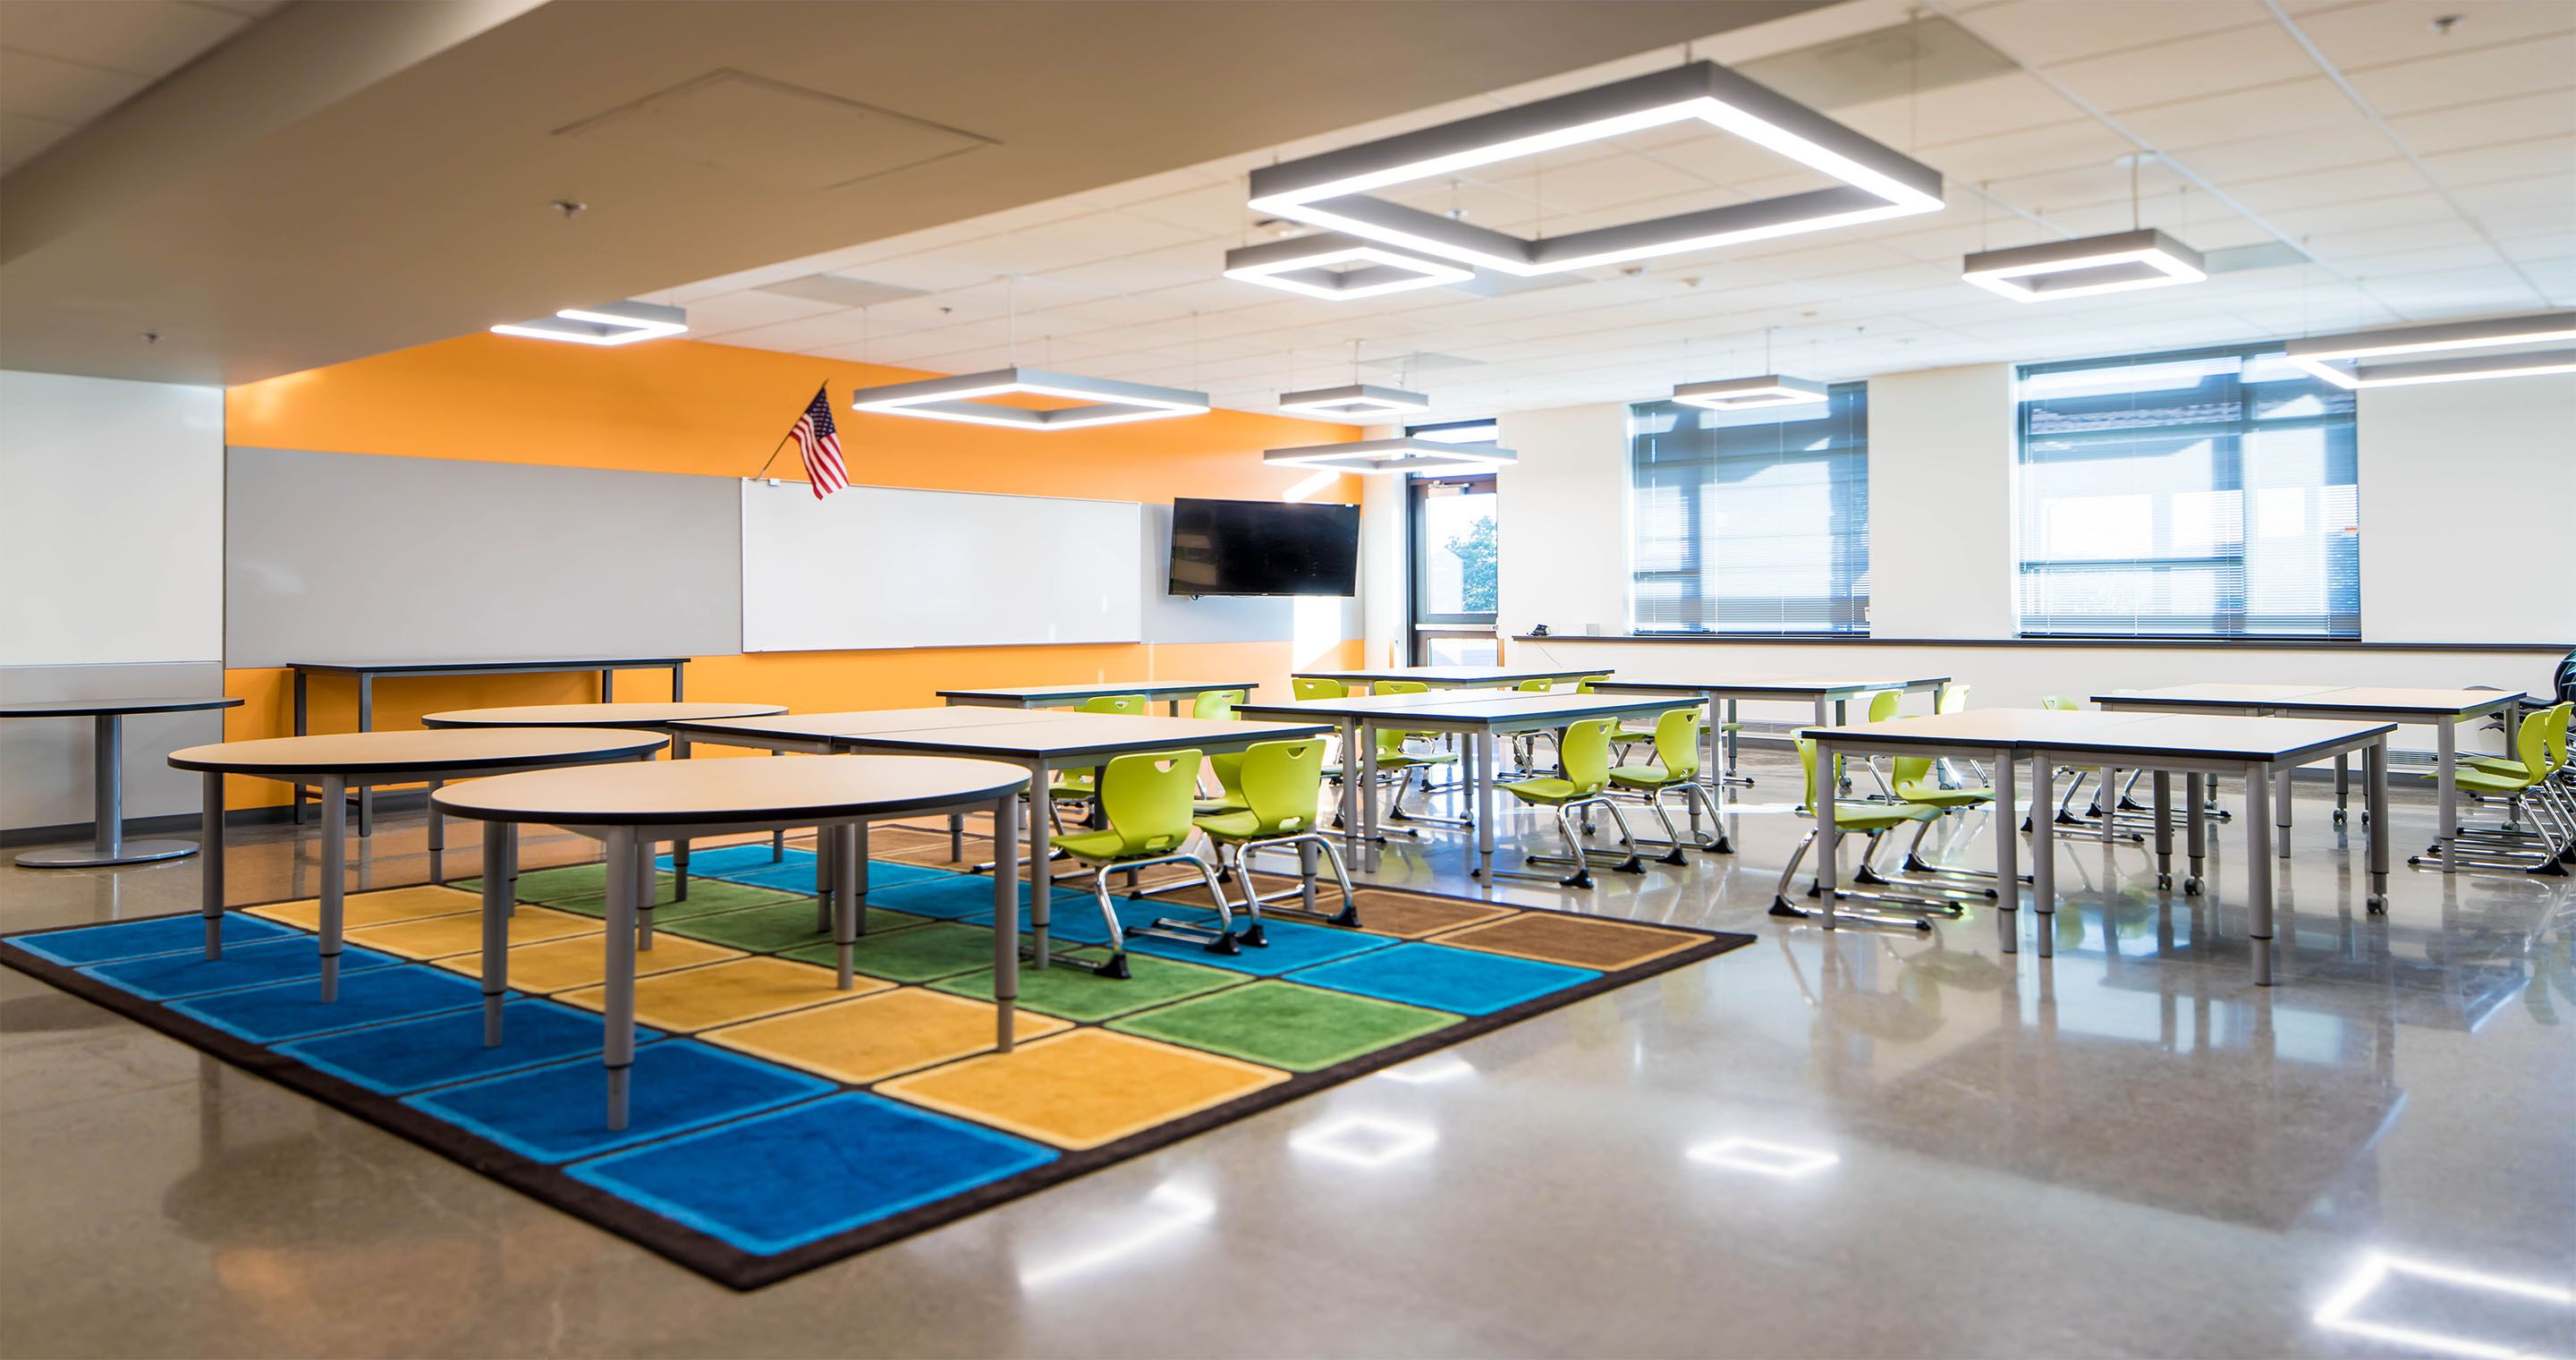 Jemtegaard Middle and Columbia River Gorge Elementary School classrooms designed by LSW Architects for flexibility by utilizing furniture and break-out spaces.